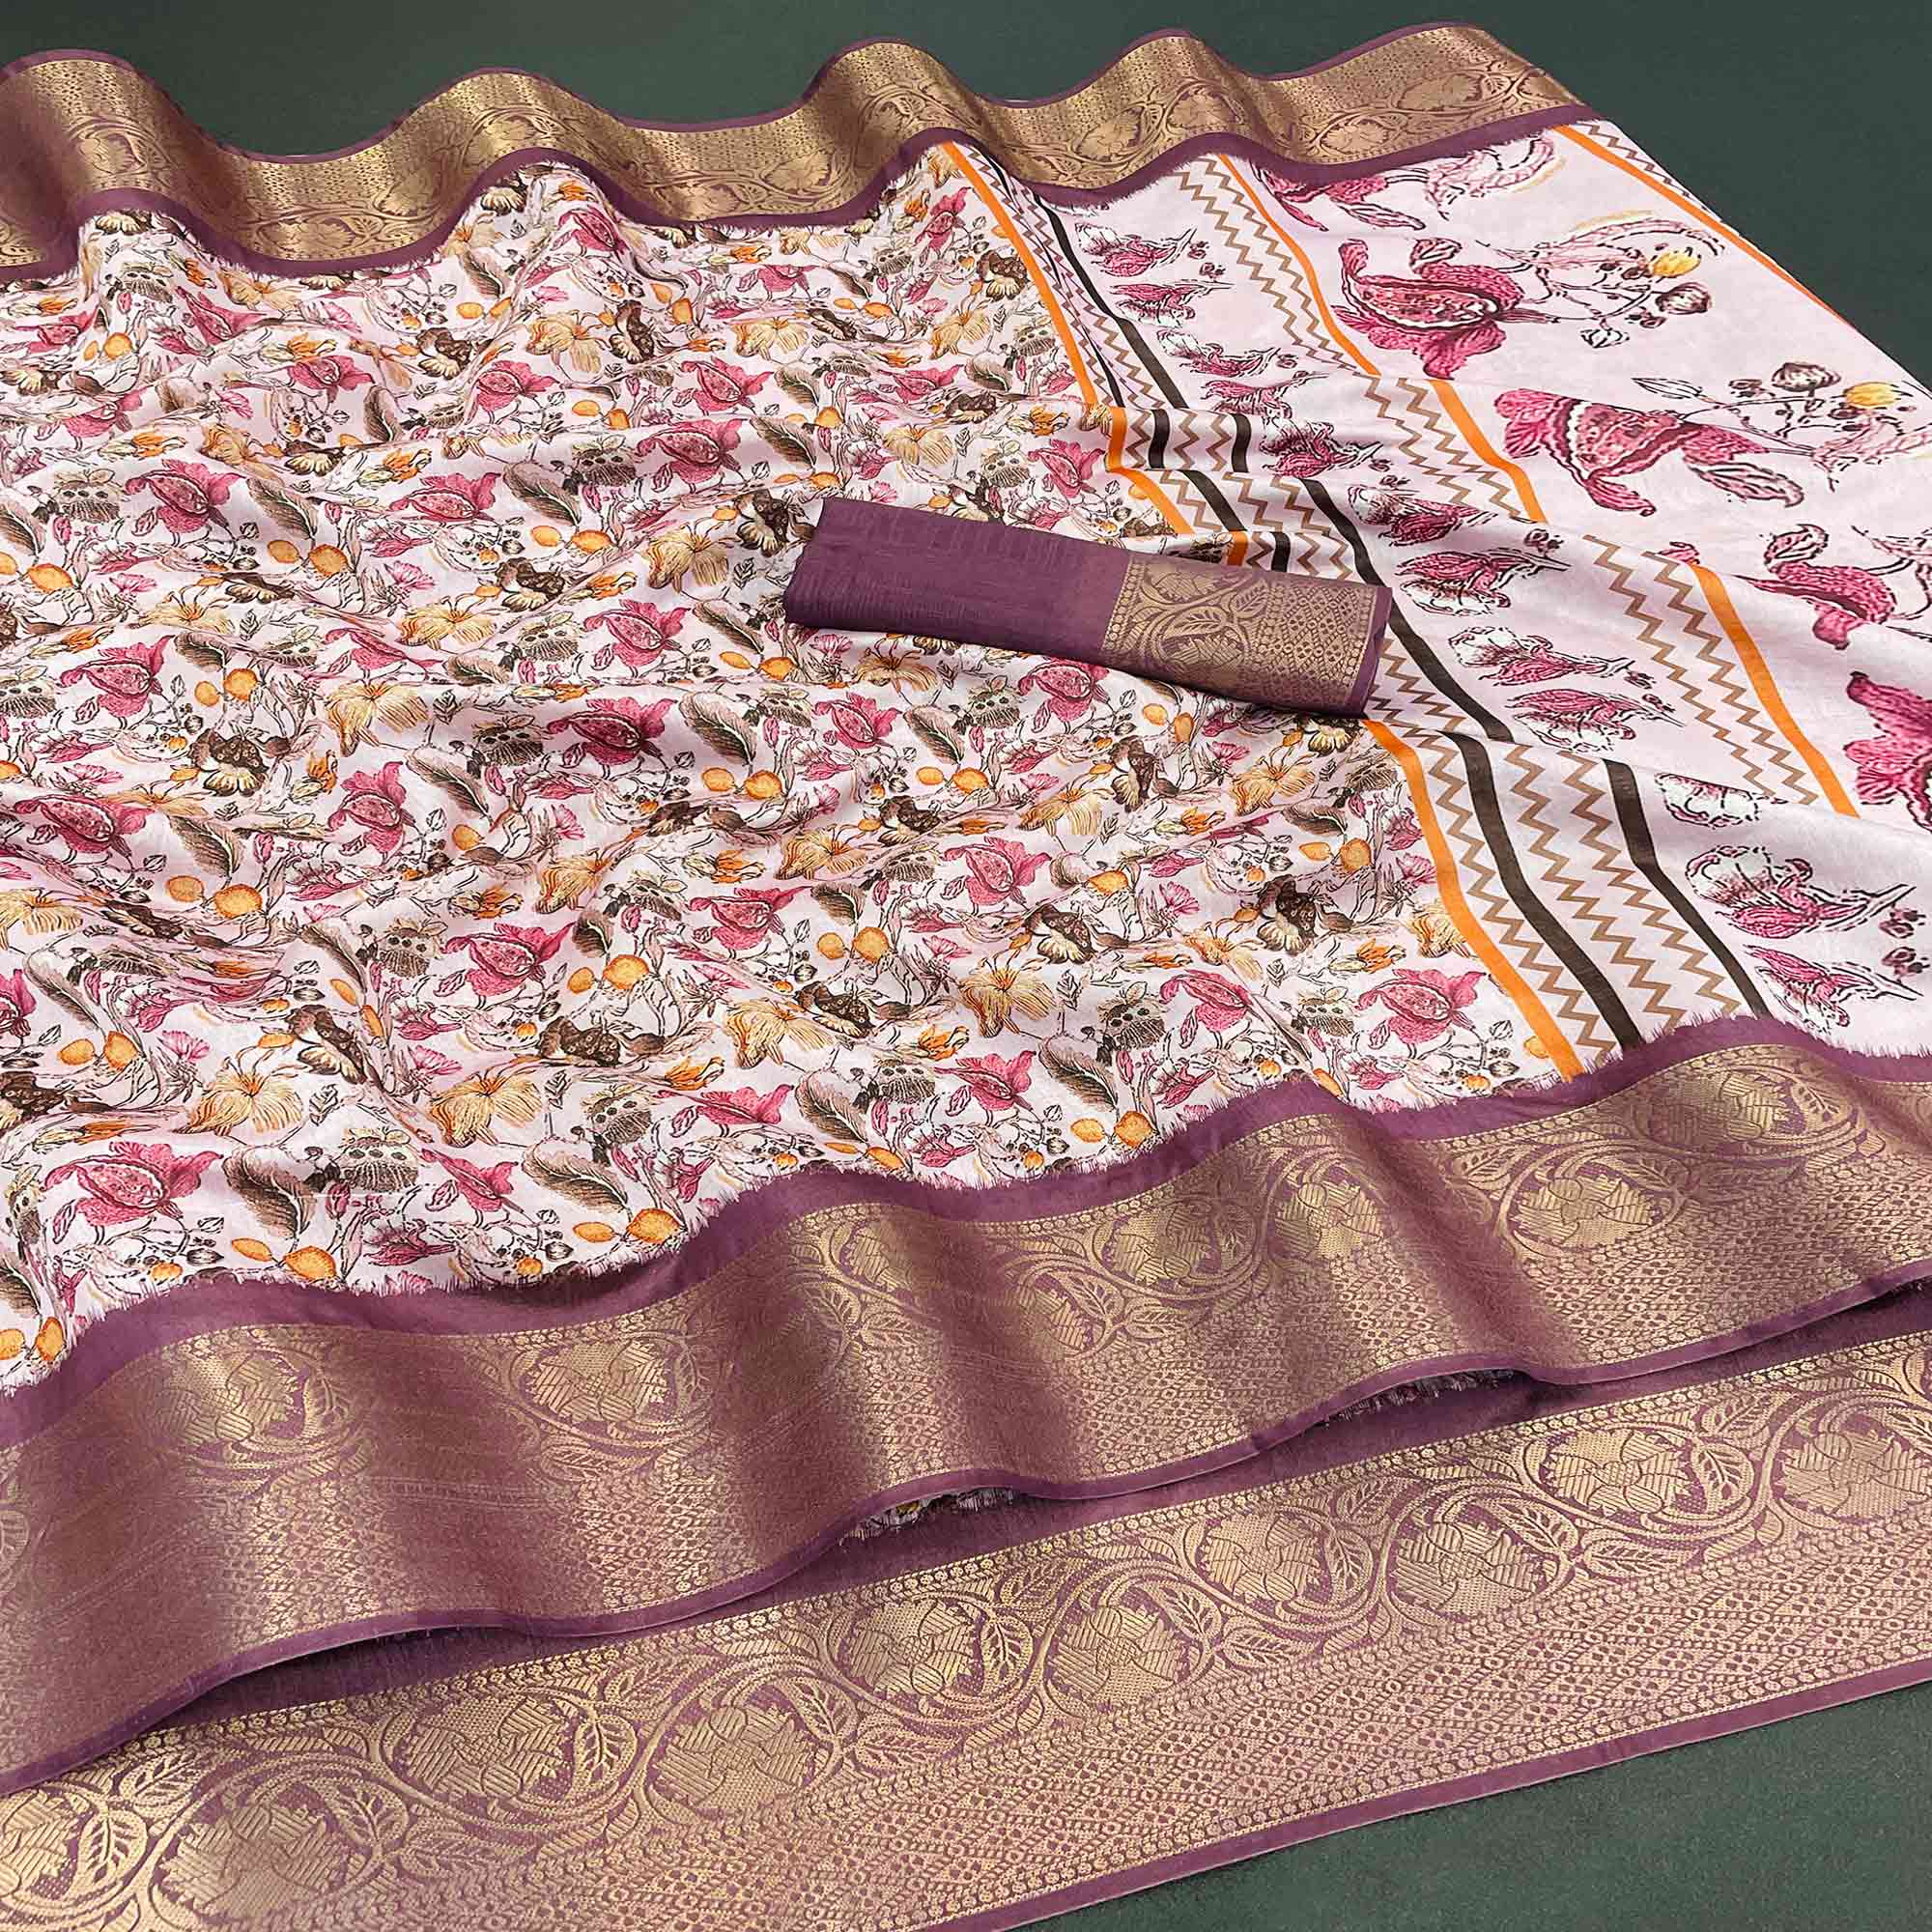 Off White & Burgundy Floral Digital Printed With Woven Border Dola Silk Saree